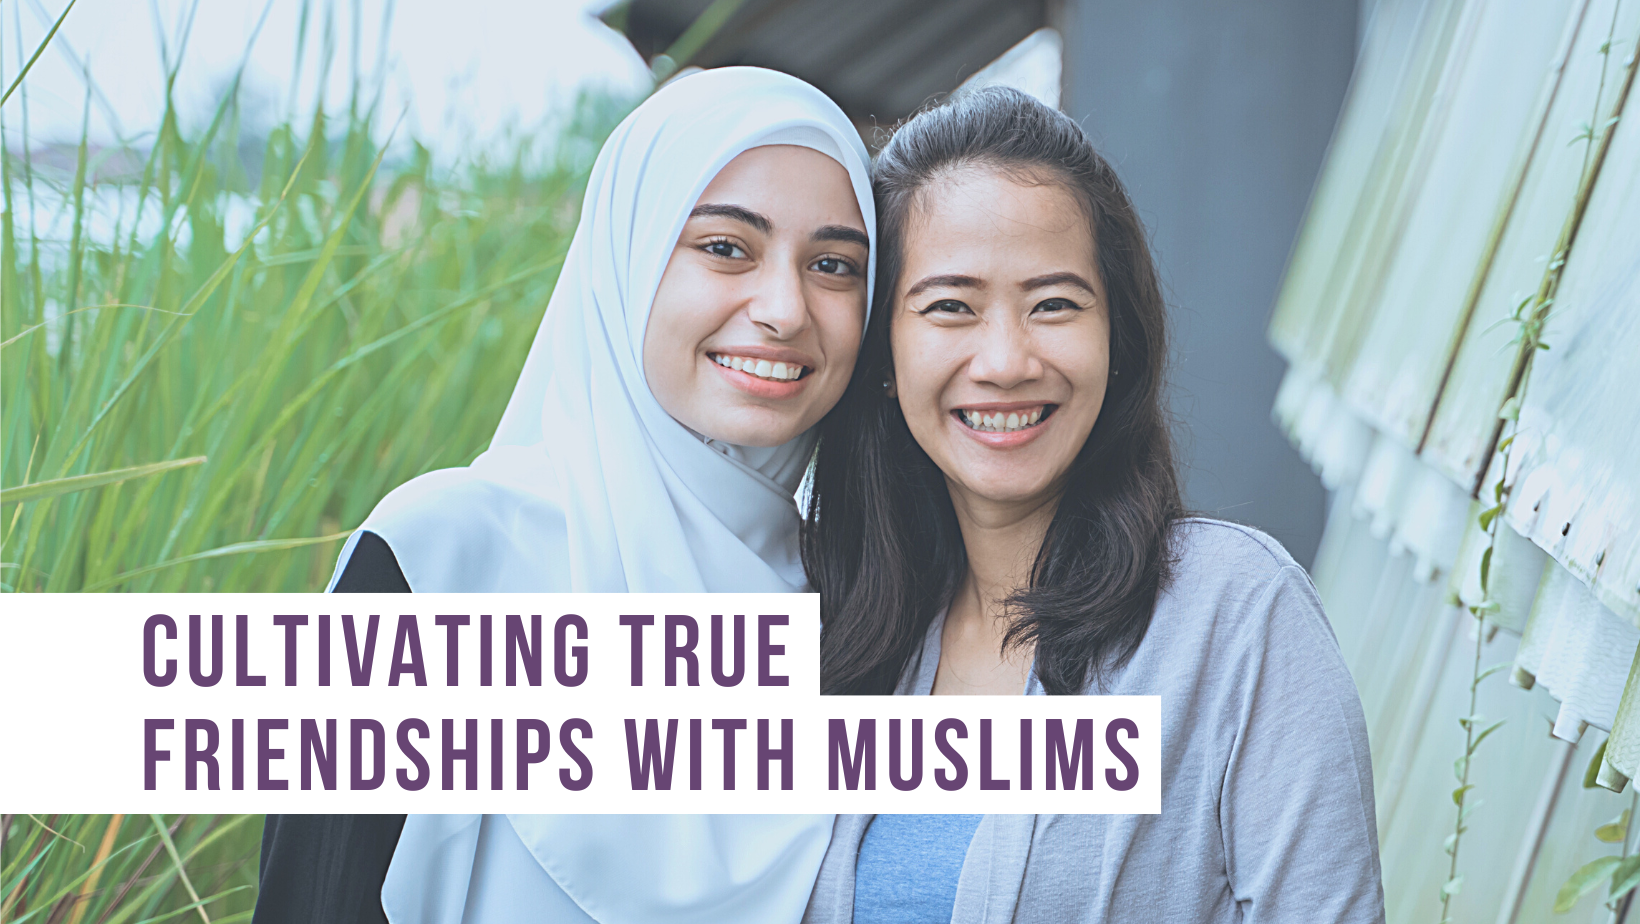 Cultivating true friendships with Muslims